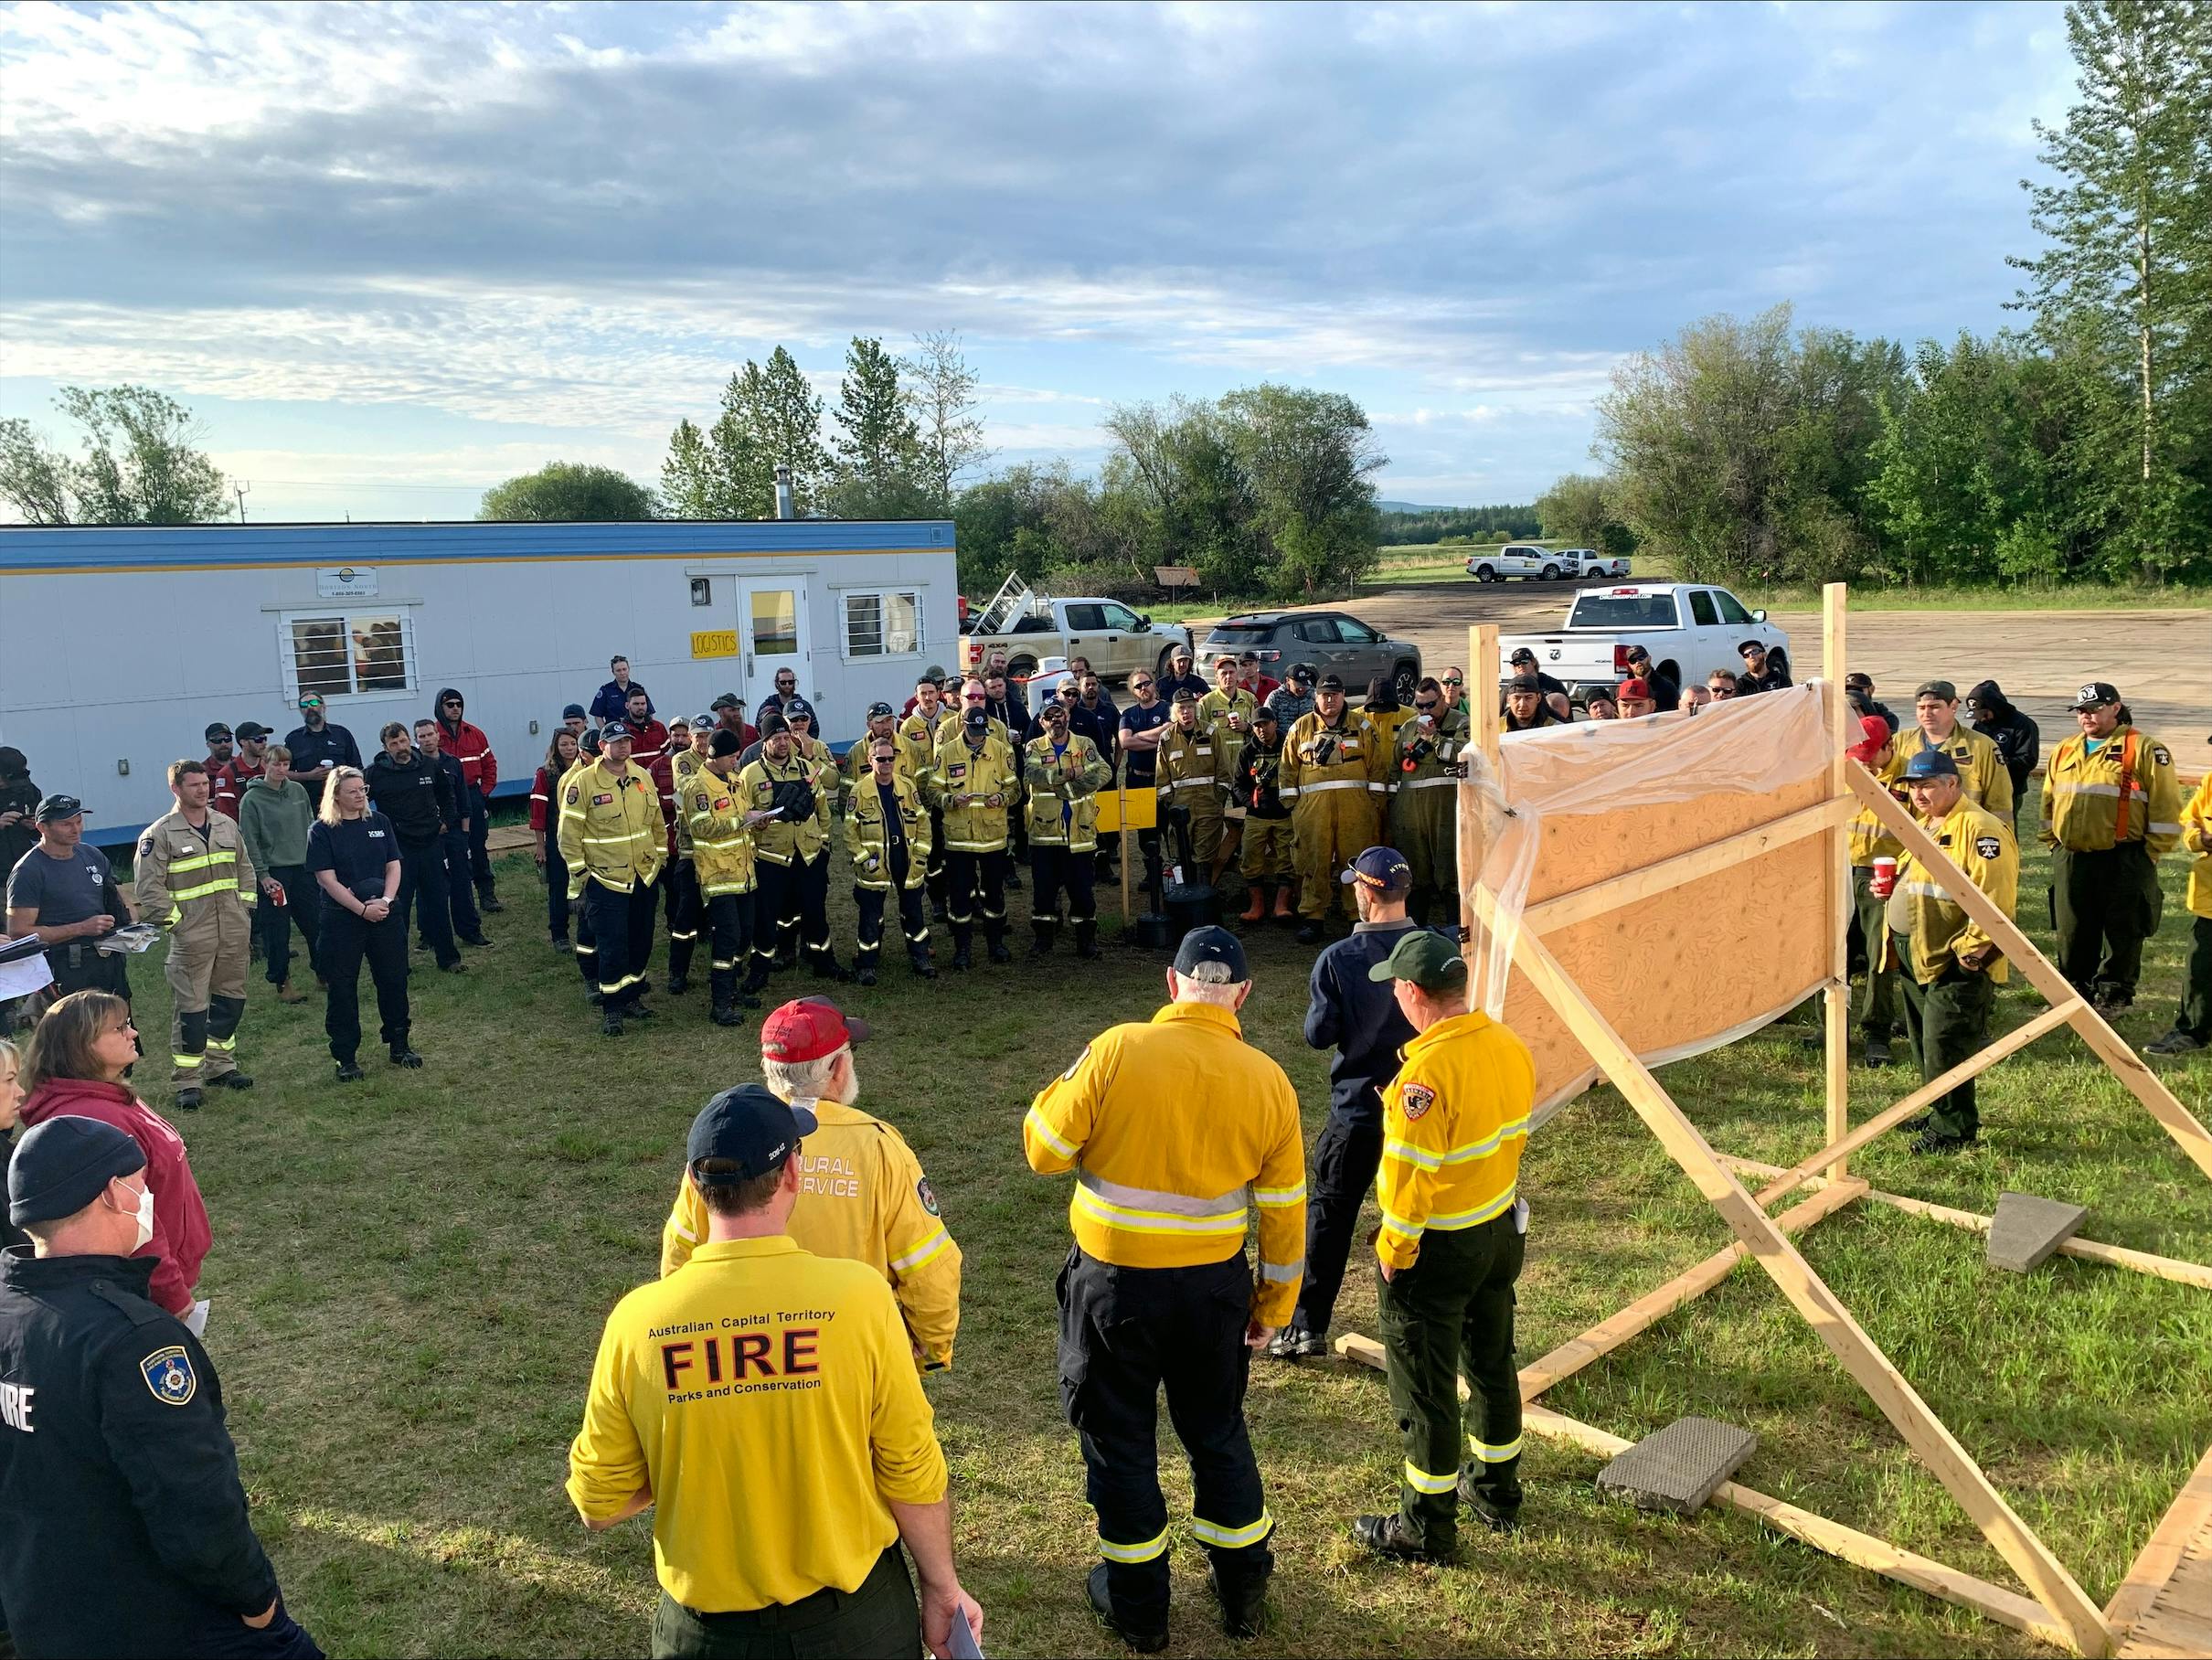 Australia, New Zealand, Alberta and USA teams during safety briefing